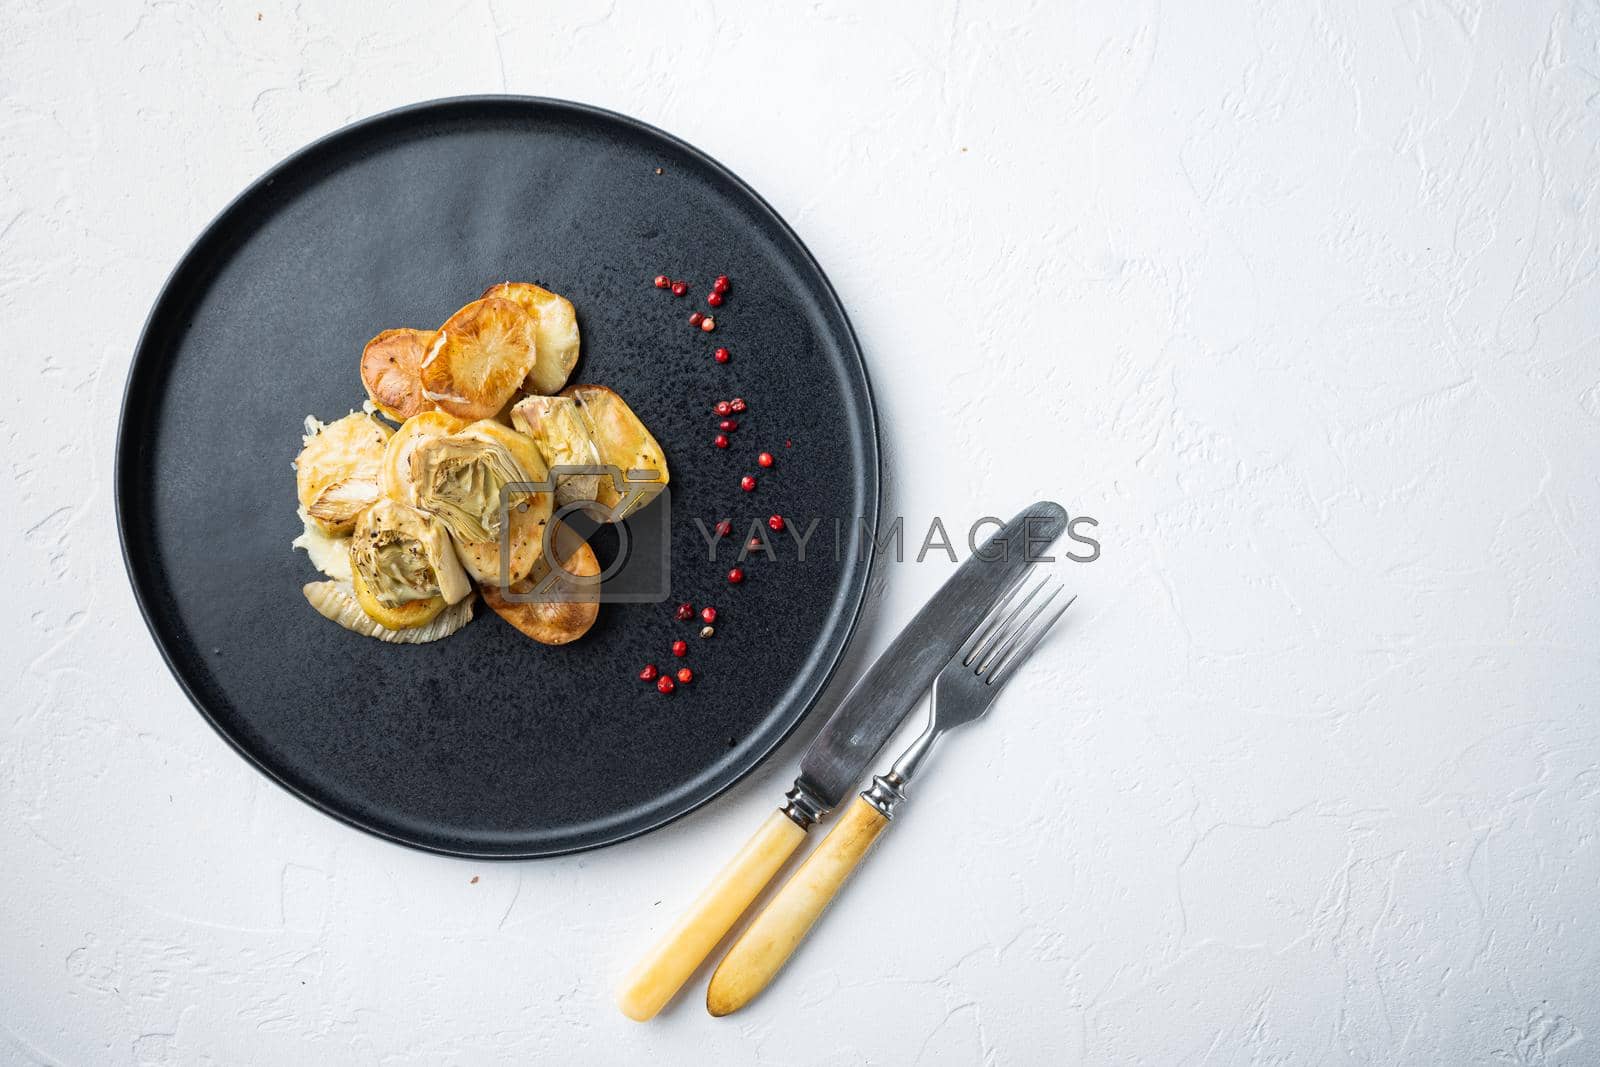 Royalty free image of Baked potato and artichoke with fennel al forno, on white textured background, top view with space for text by Ilianesolenyi